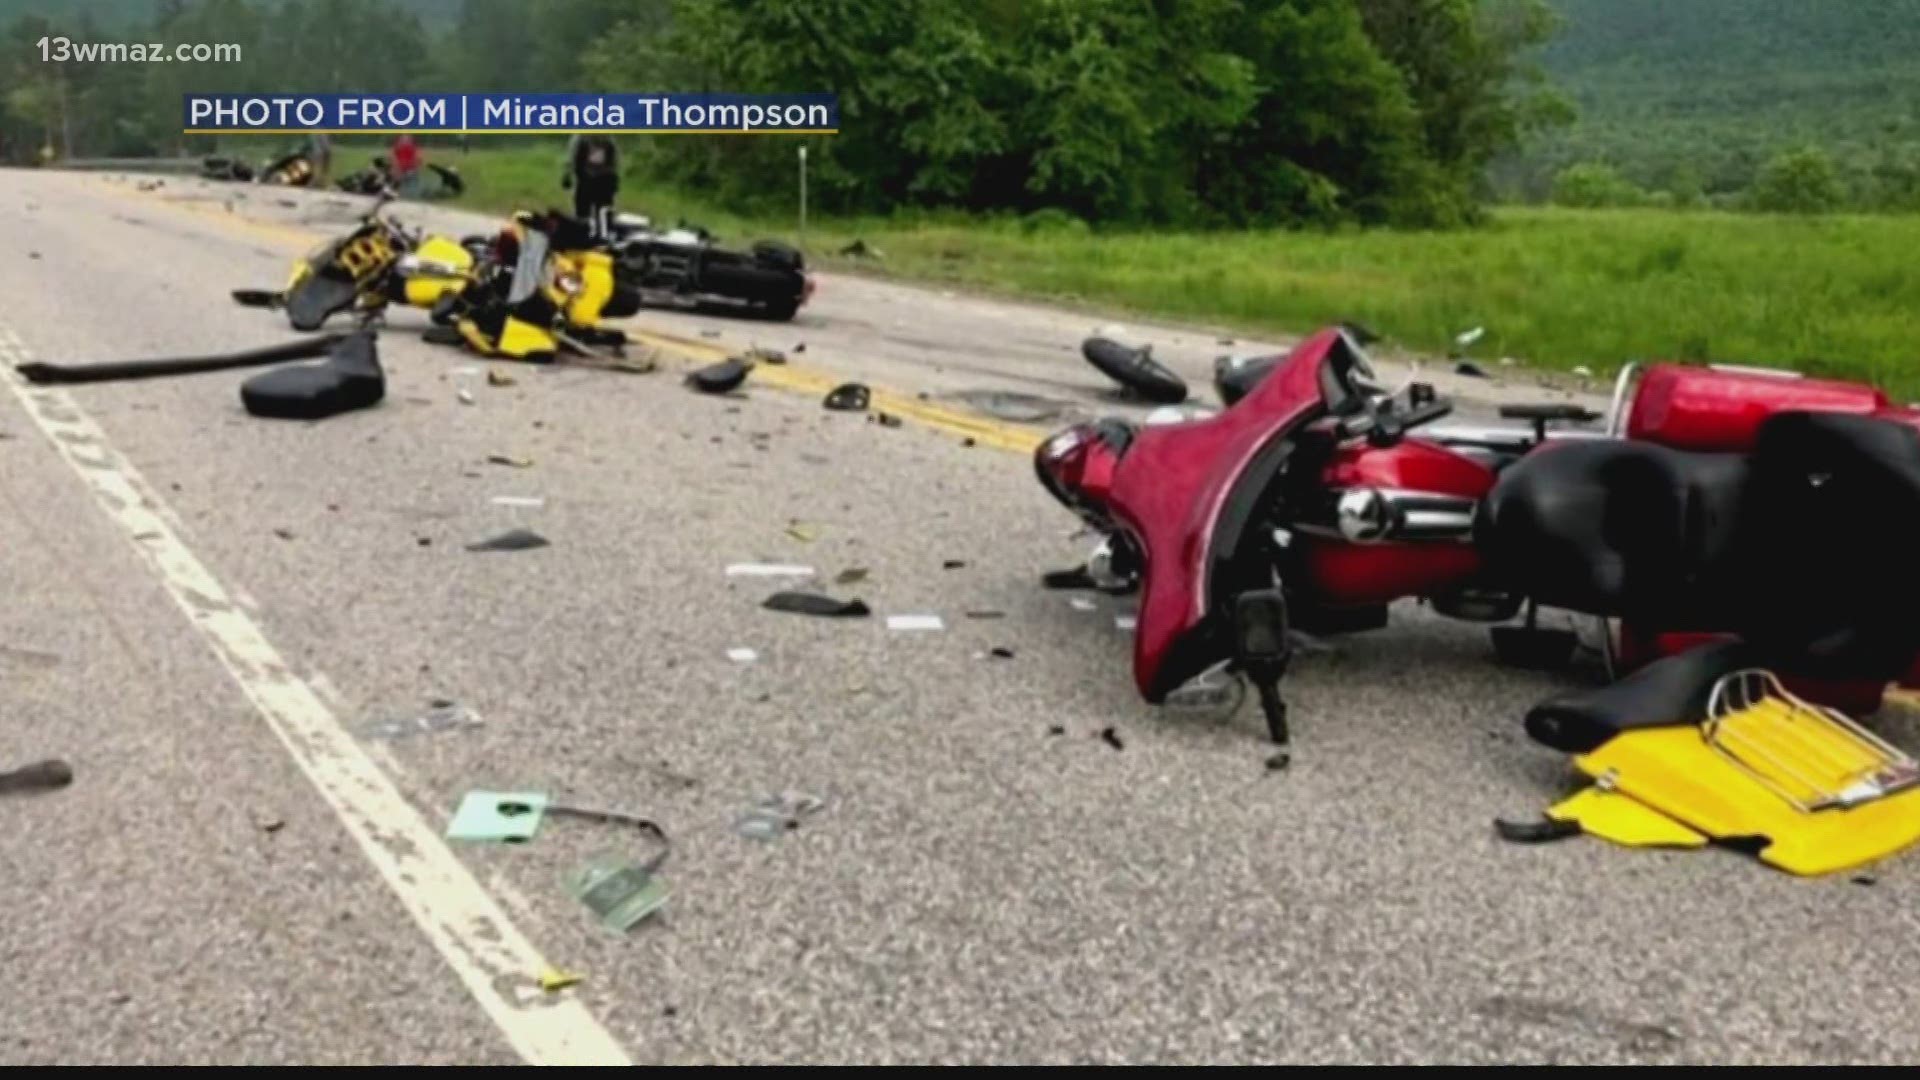 Macon has seen three deadly motorcycle crashes in the past four days. One safety expert says there are actually things you can do to protect bikers on the road.